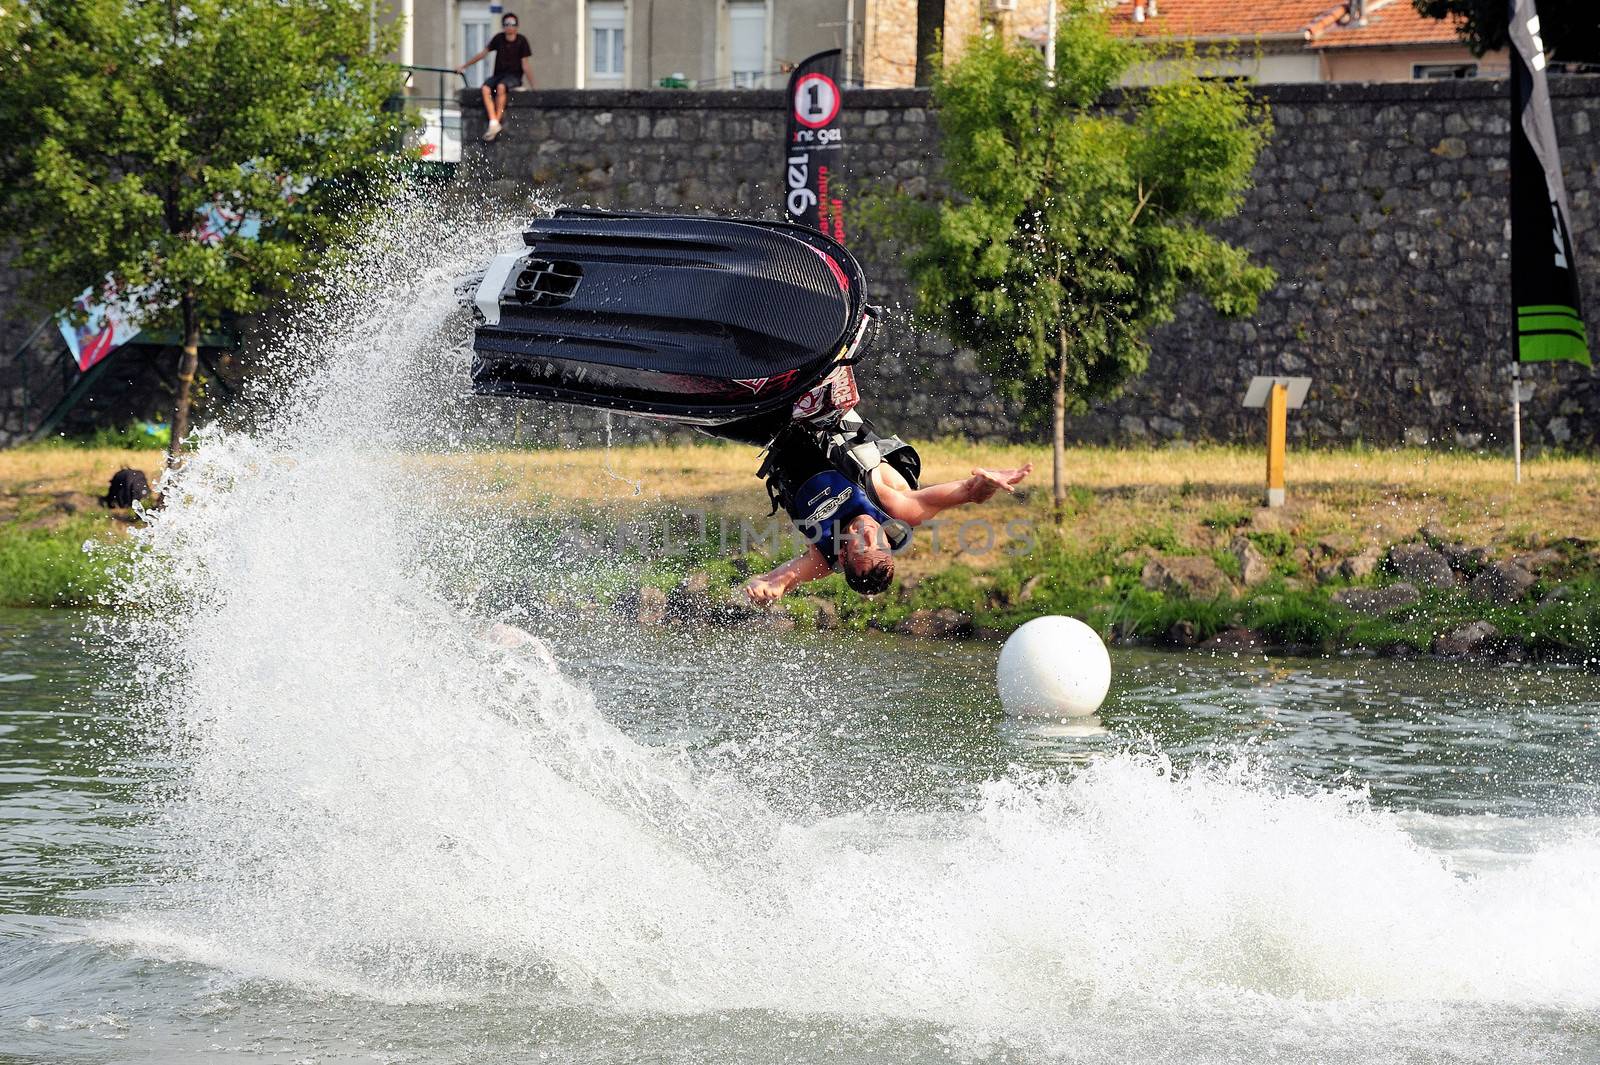 Ales - France - on July 14th, 2013 - Championship of France of Jet Ski on the river Gardon. lifting category or freestyle